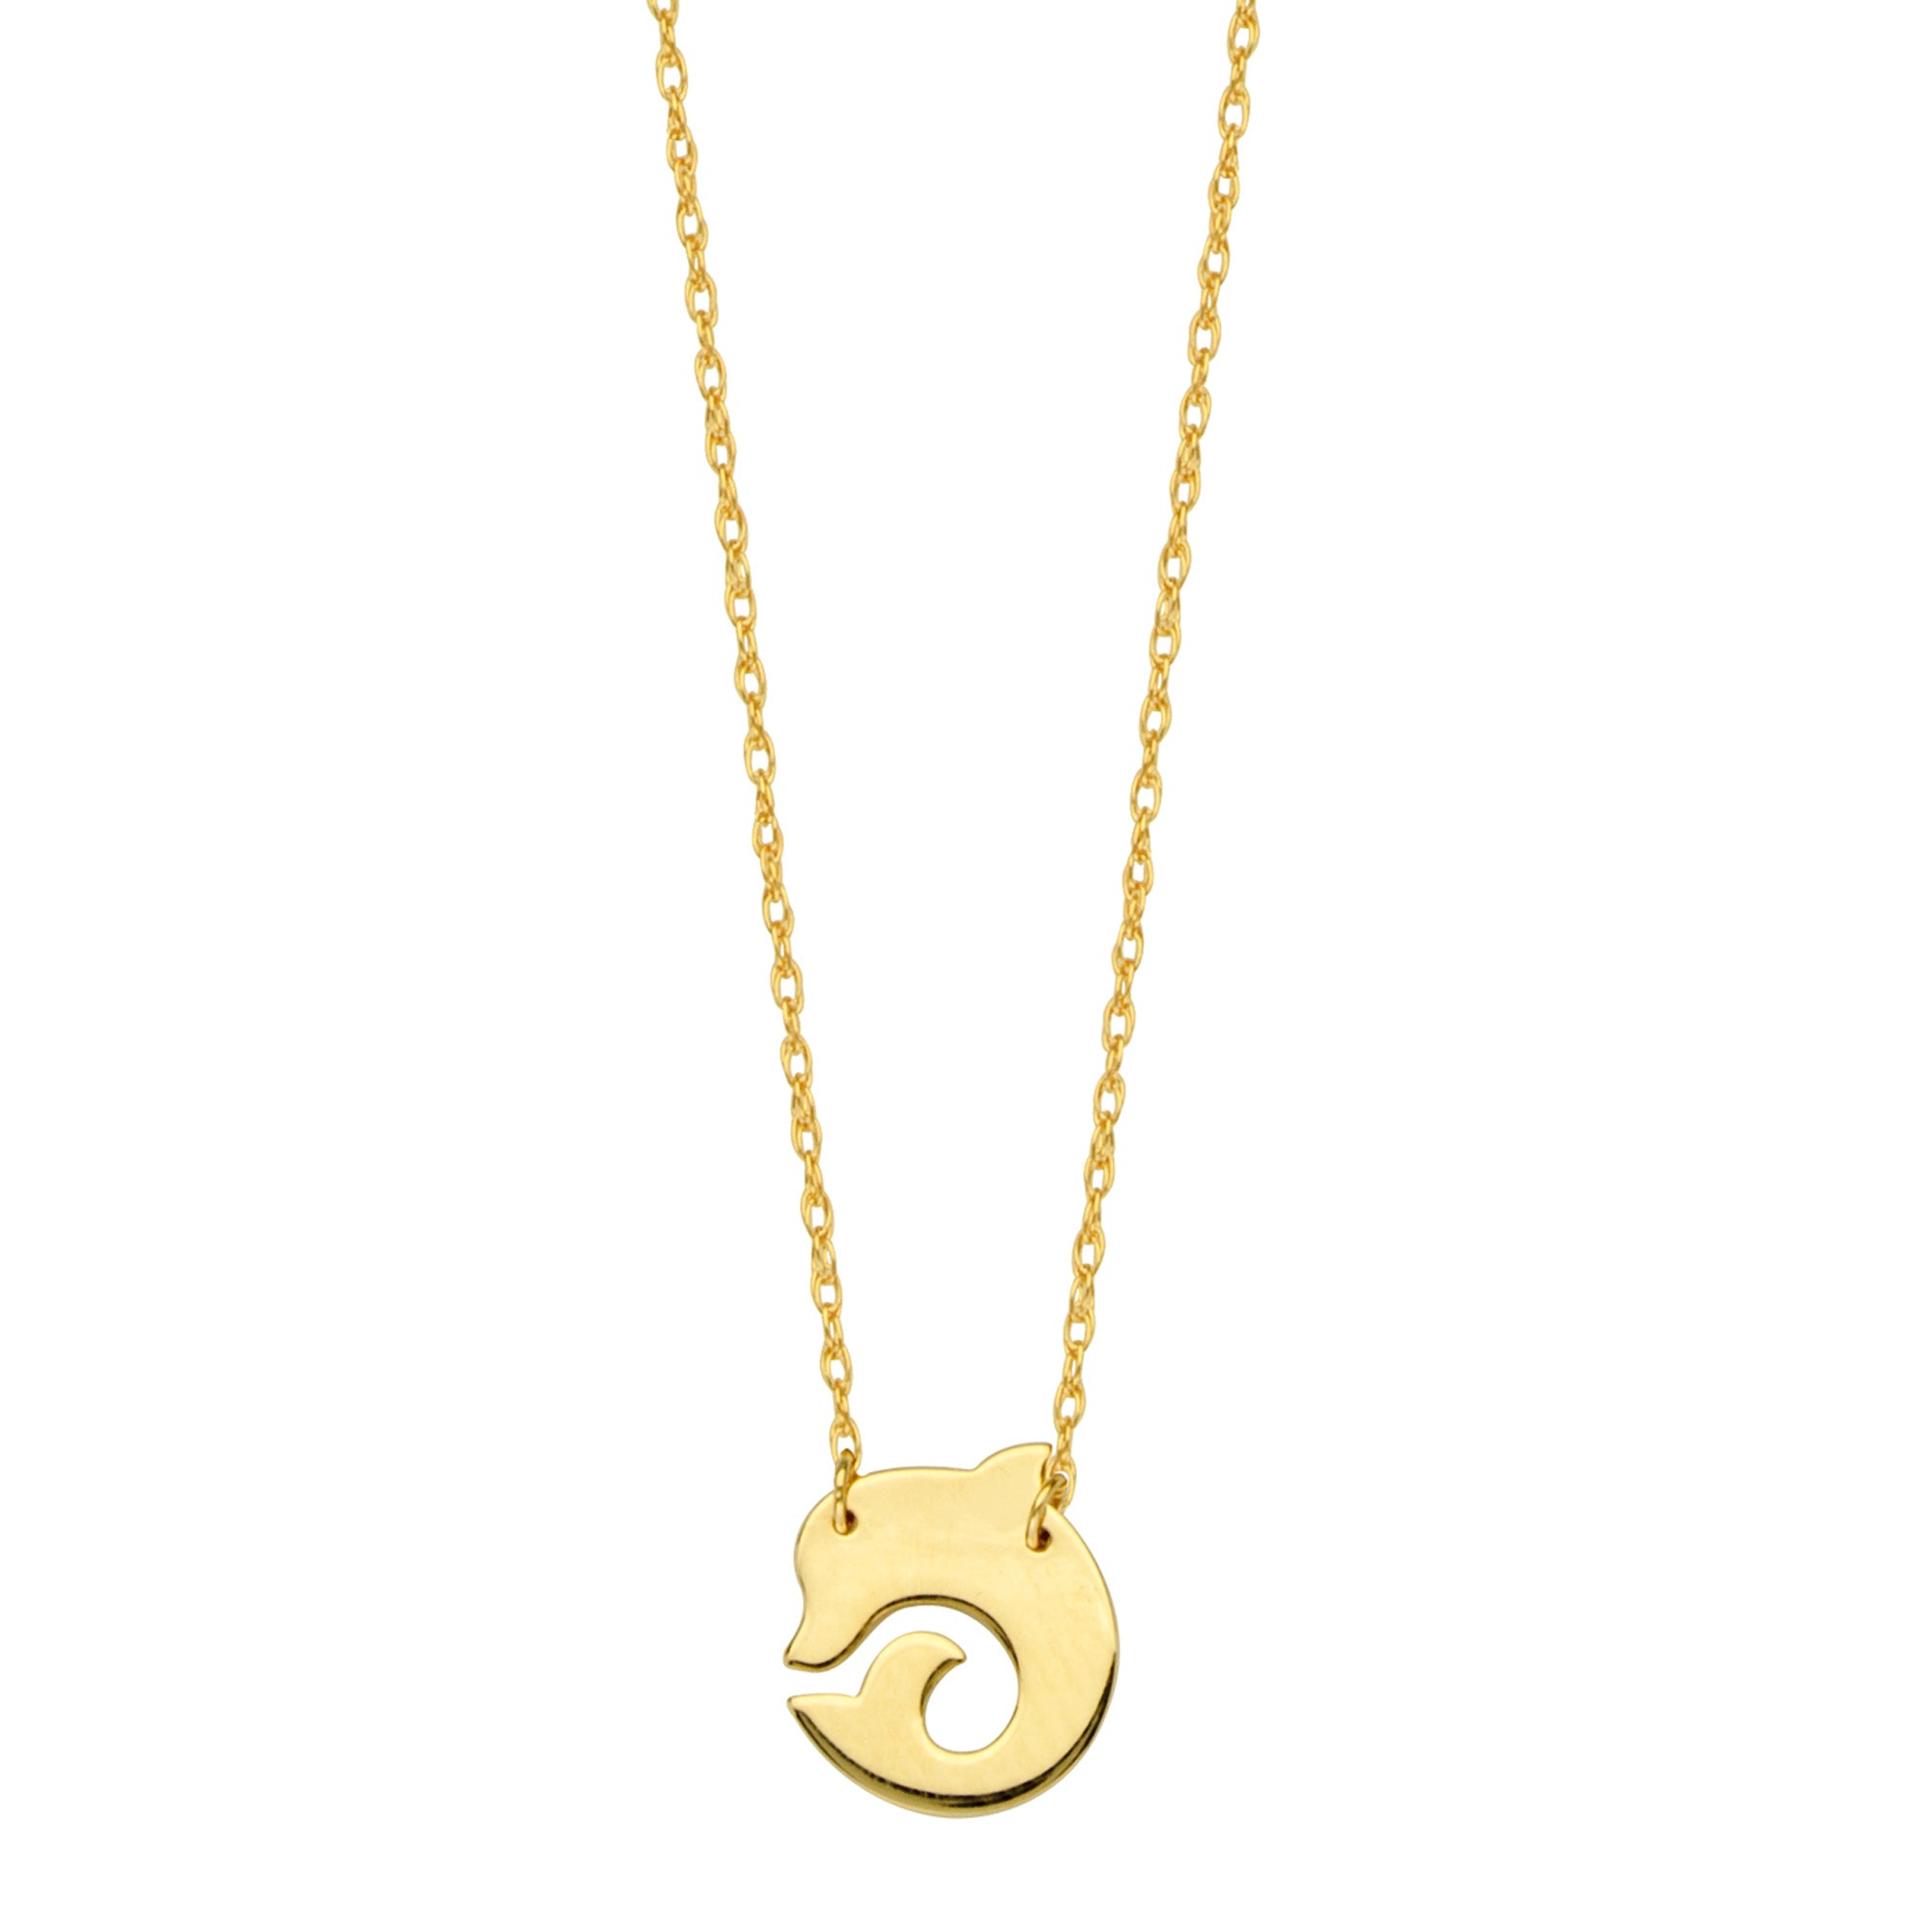 14K Yellow Gold Mini Dolphin Pendant Necklace, 16" To 18" Adjustable